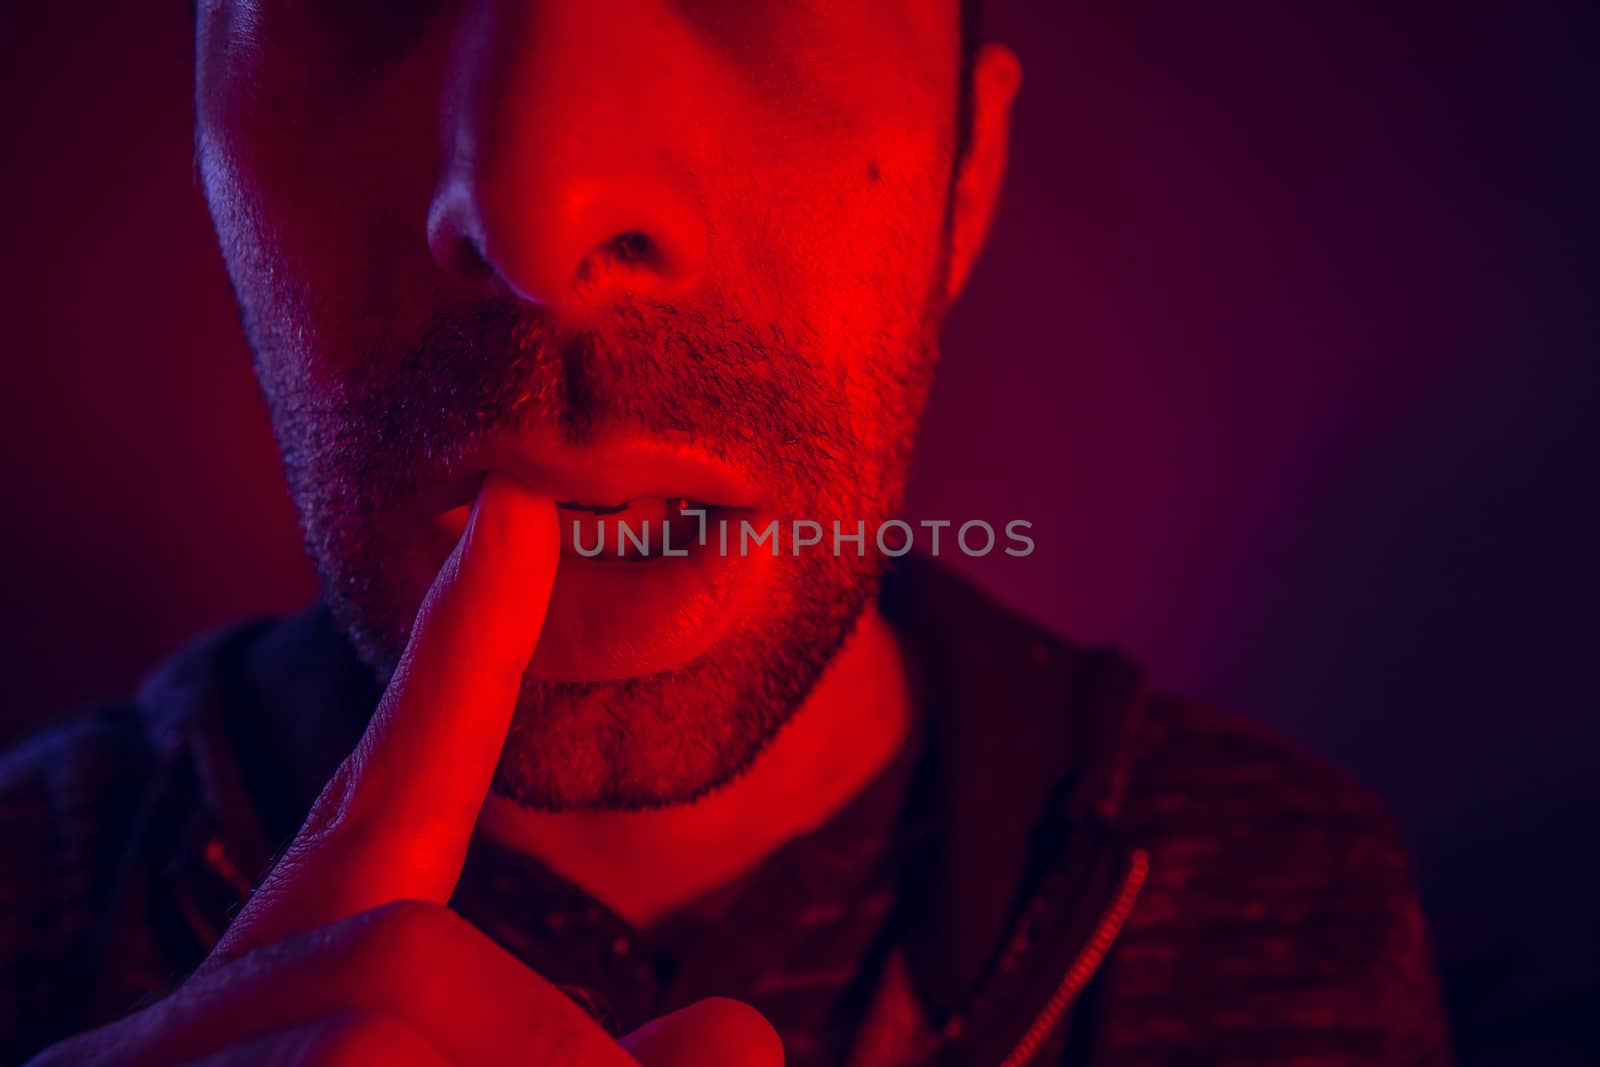 Man with seductive facial expression holding finger on mouth by wavemovies